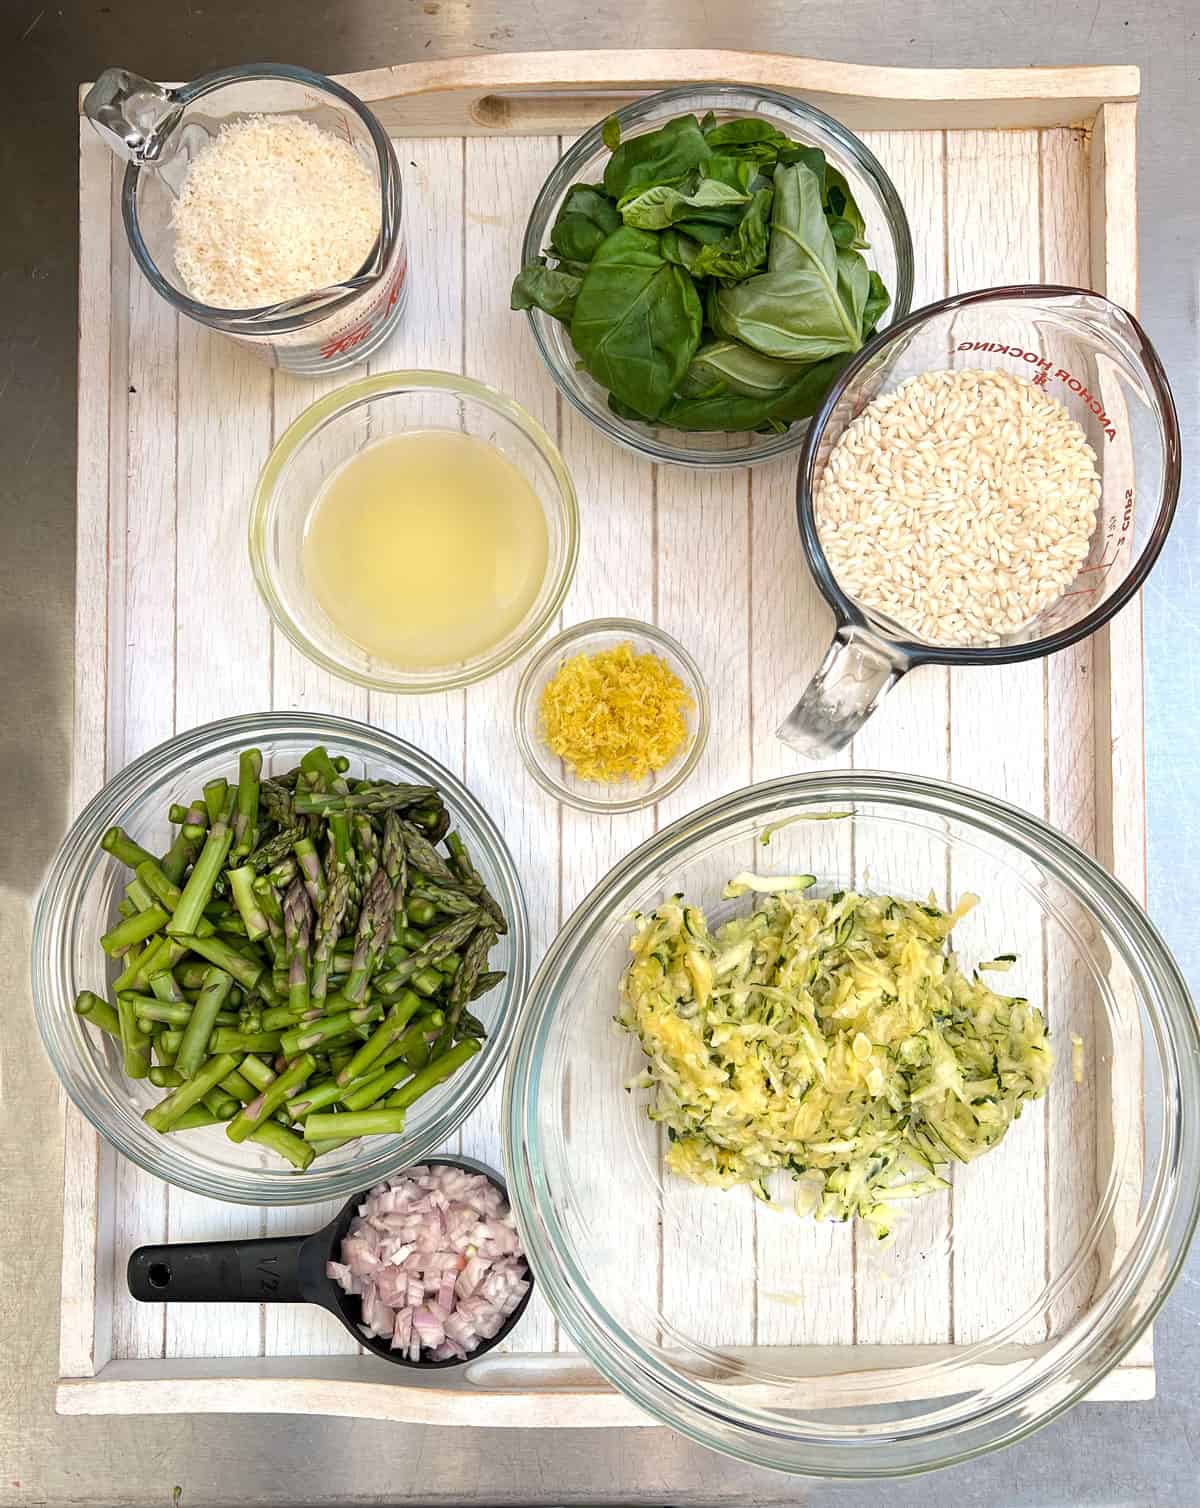 risotto ingredients, chopped, sliced and prepped on a white tray: chopped shallots, grated zucchini, sliced asparagus, leaves of basil in a bowl, small bowl of lemon juice, small bowl of lemon zest, cup of grated parmesan, cup of short grain rice